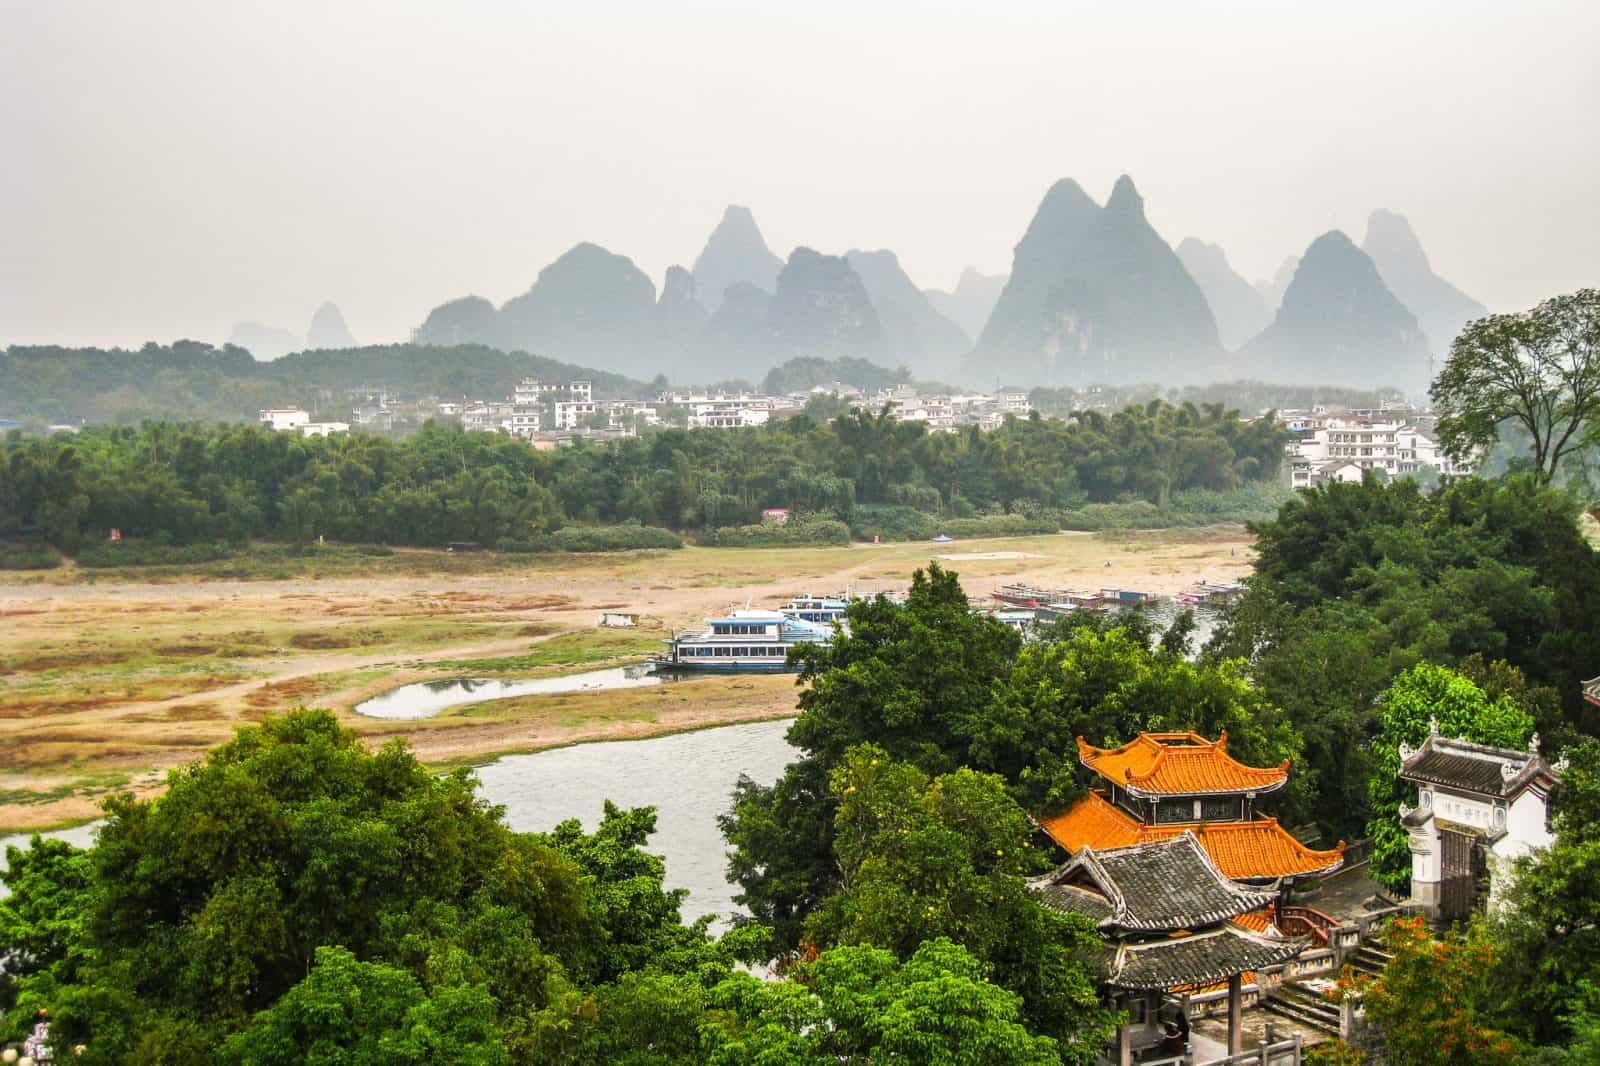 Landscapes in Yangshuo, China